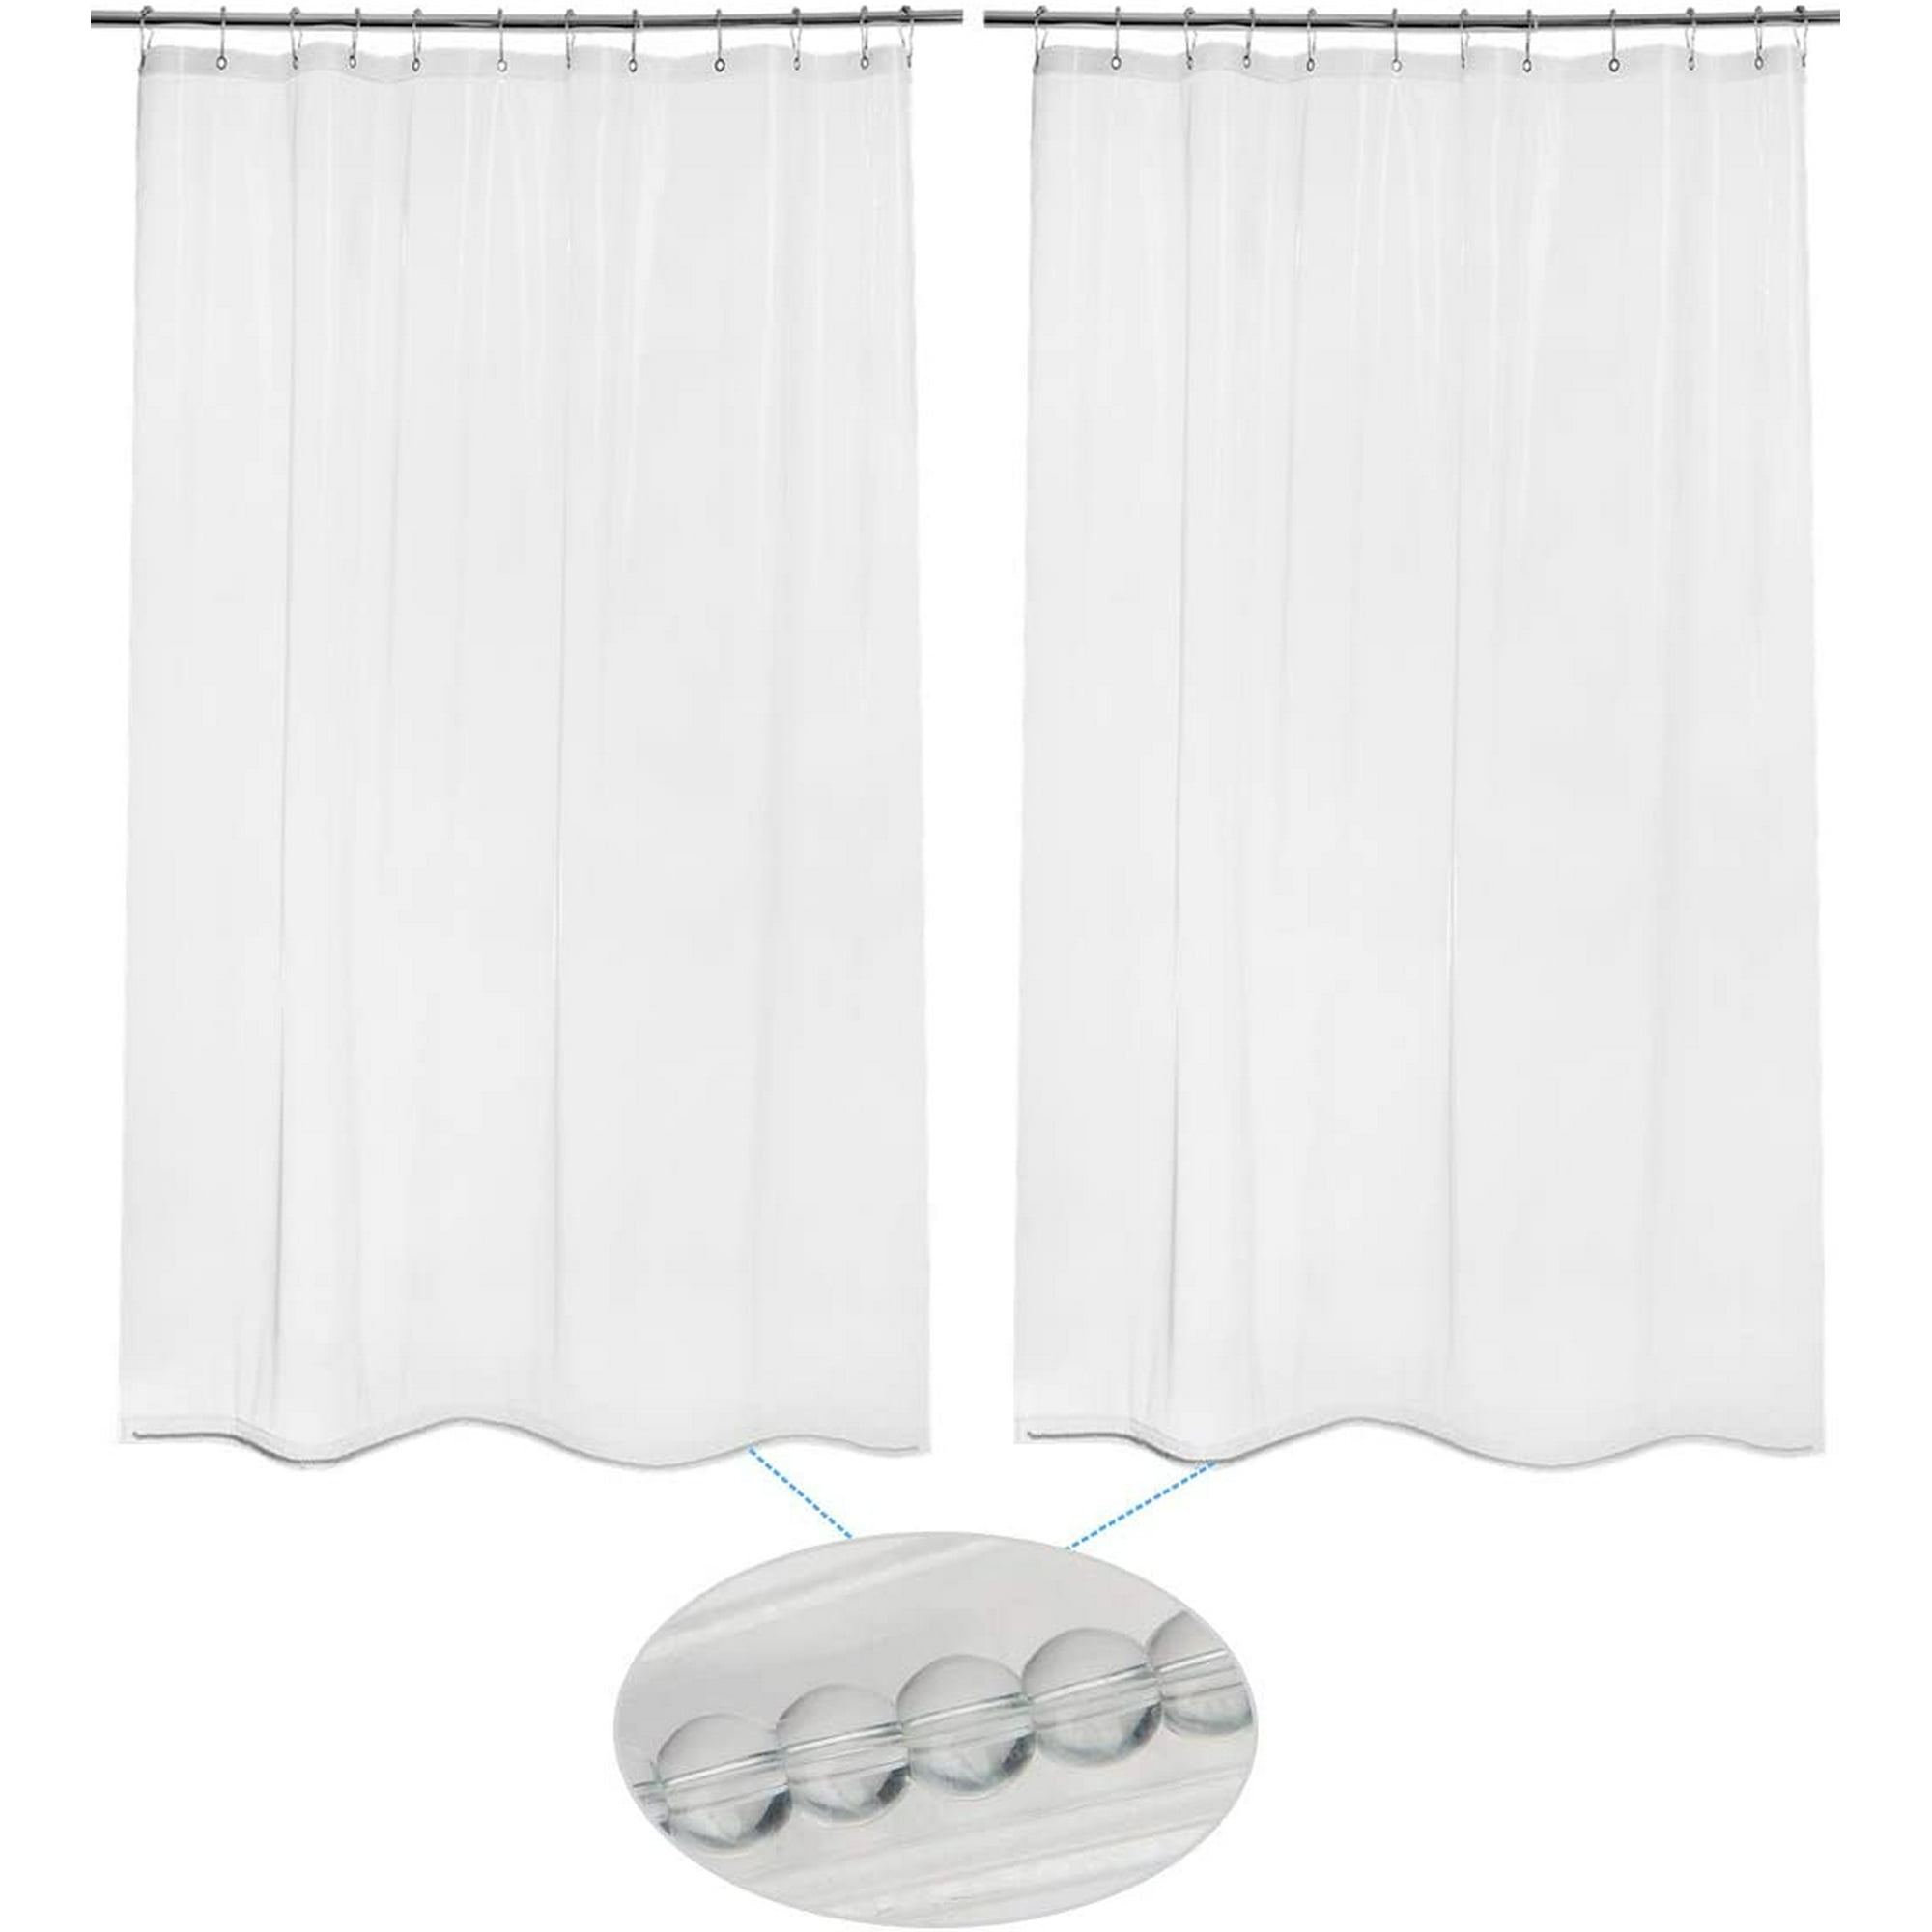 2 Pack Thin Shower Curtain Liners 72 X, How To Hang A Heavy Shower Curtain